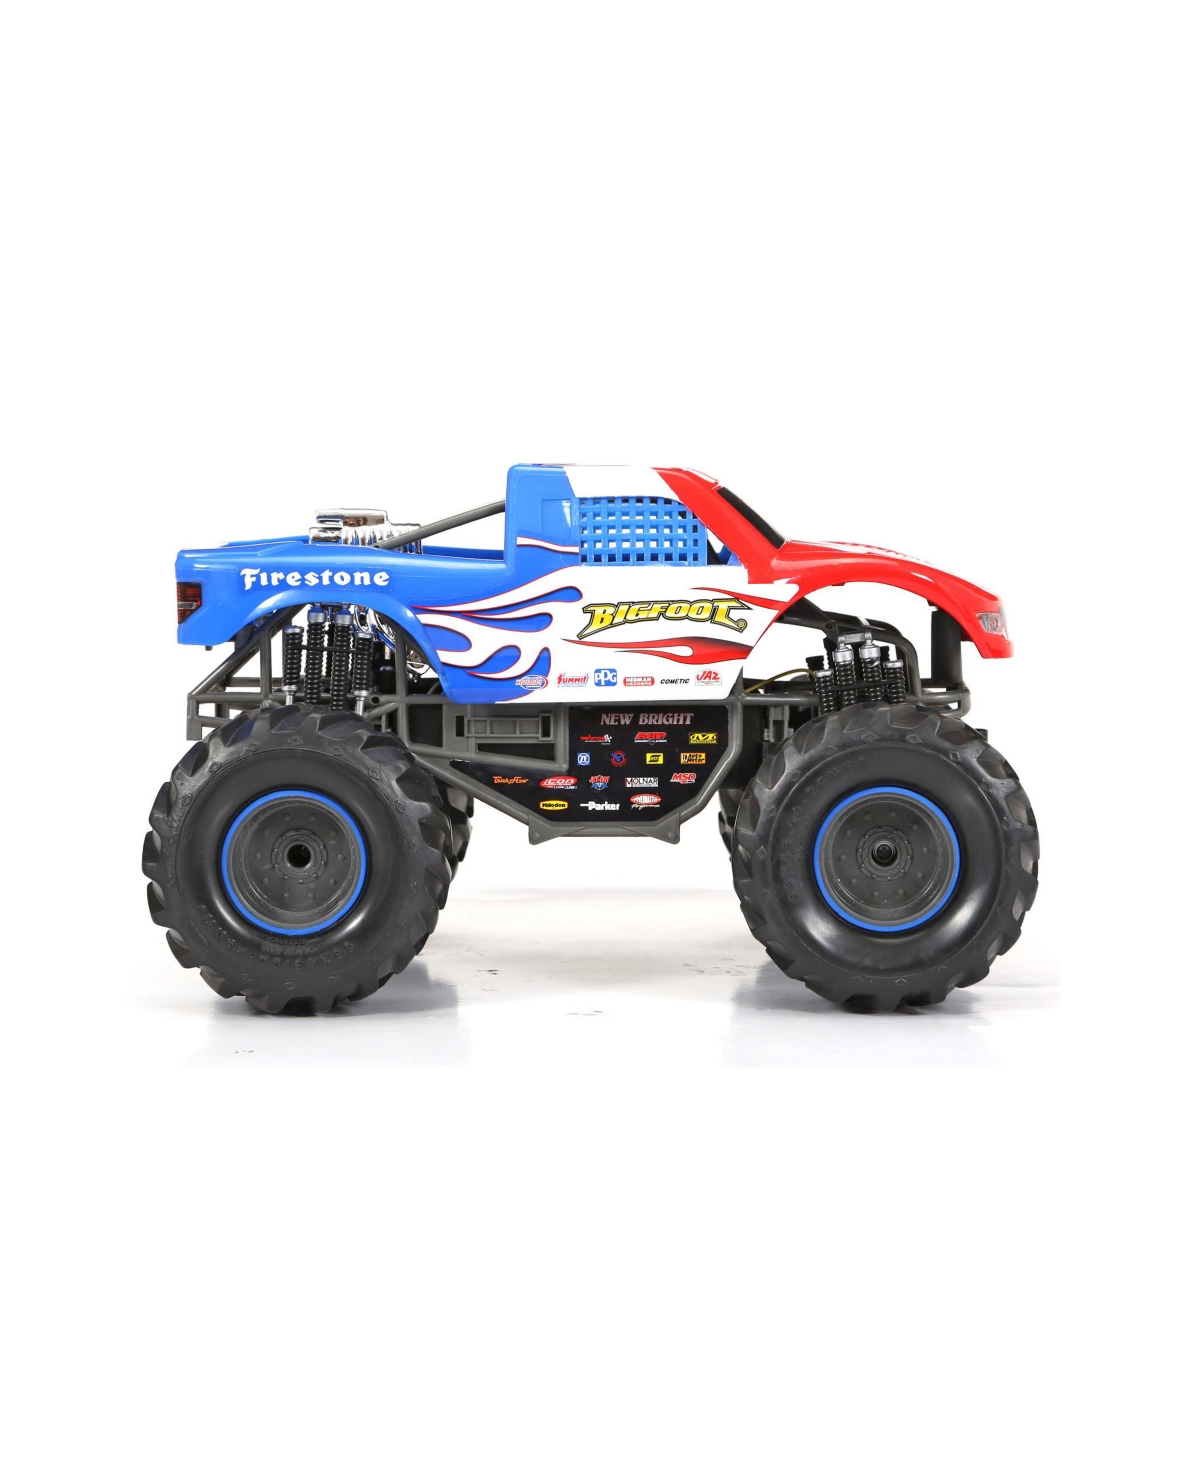 New Bright Kids' 1:15 Remote Control Big Foot Battery Operated Monster Truck In Multi